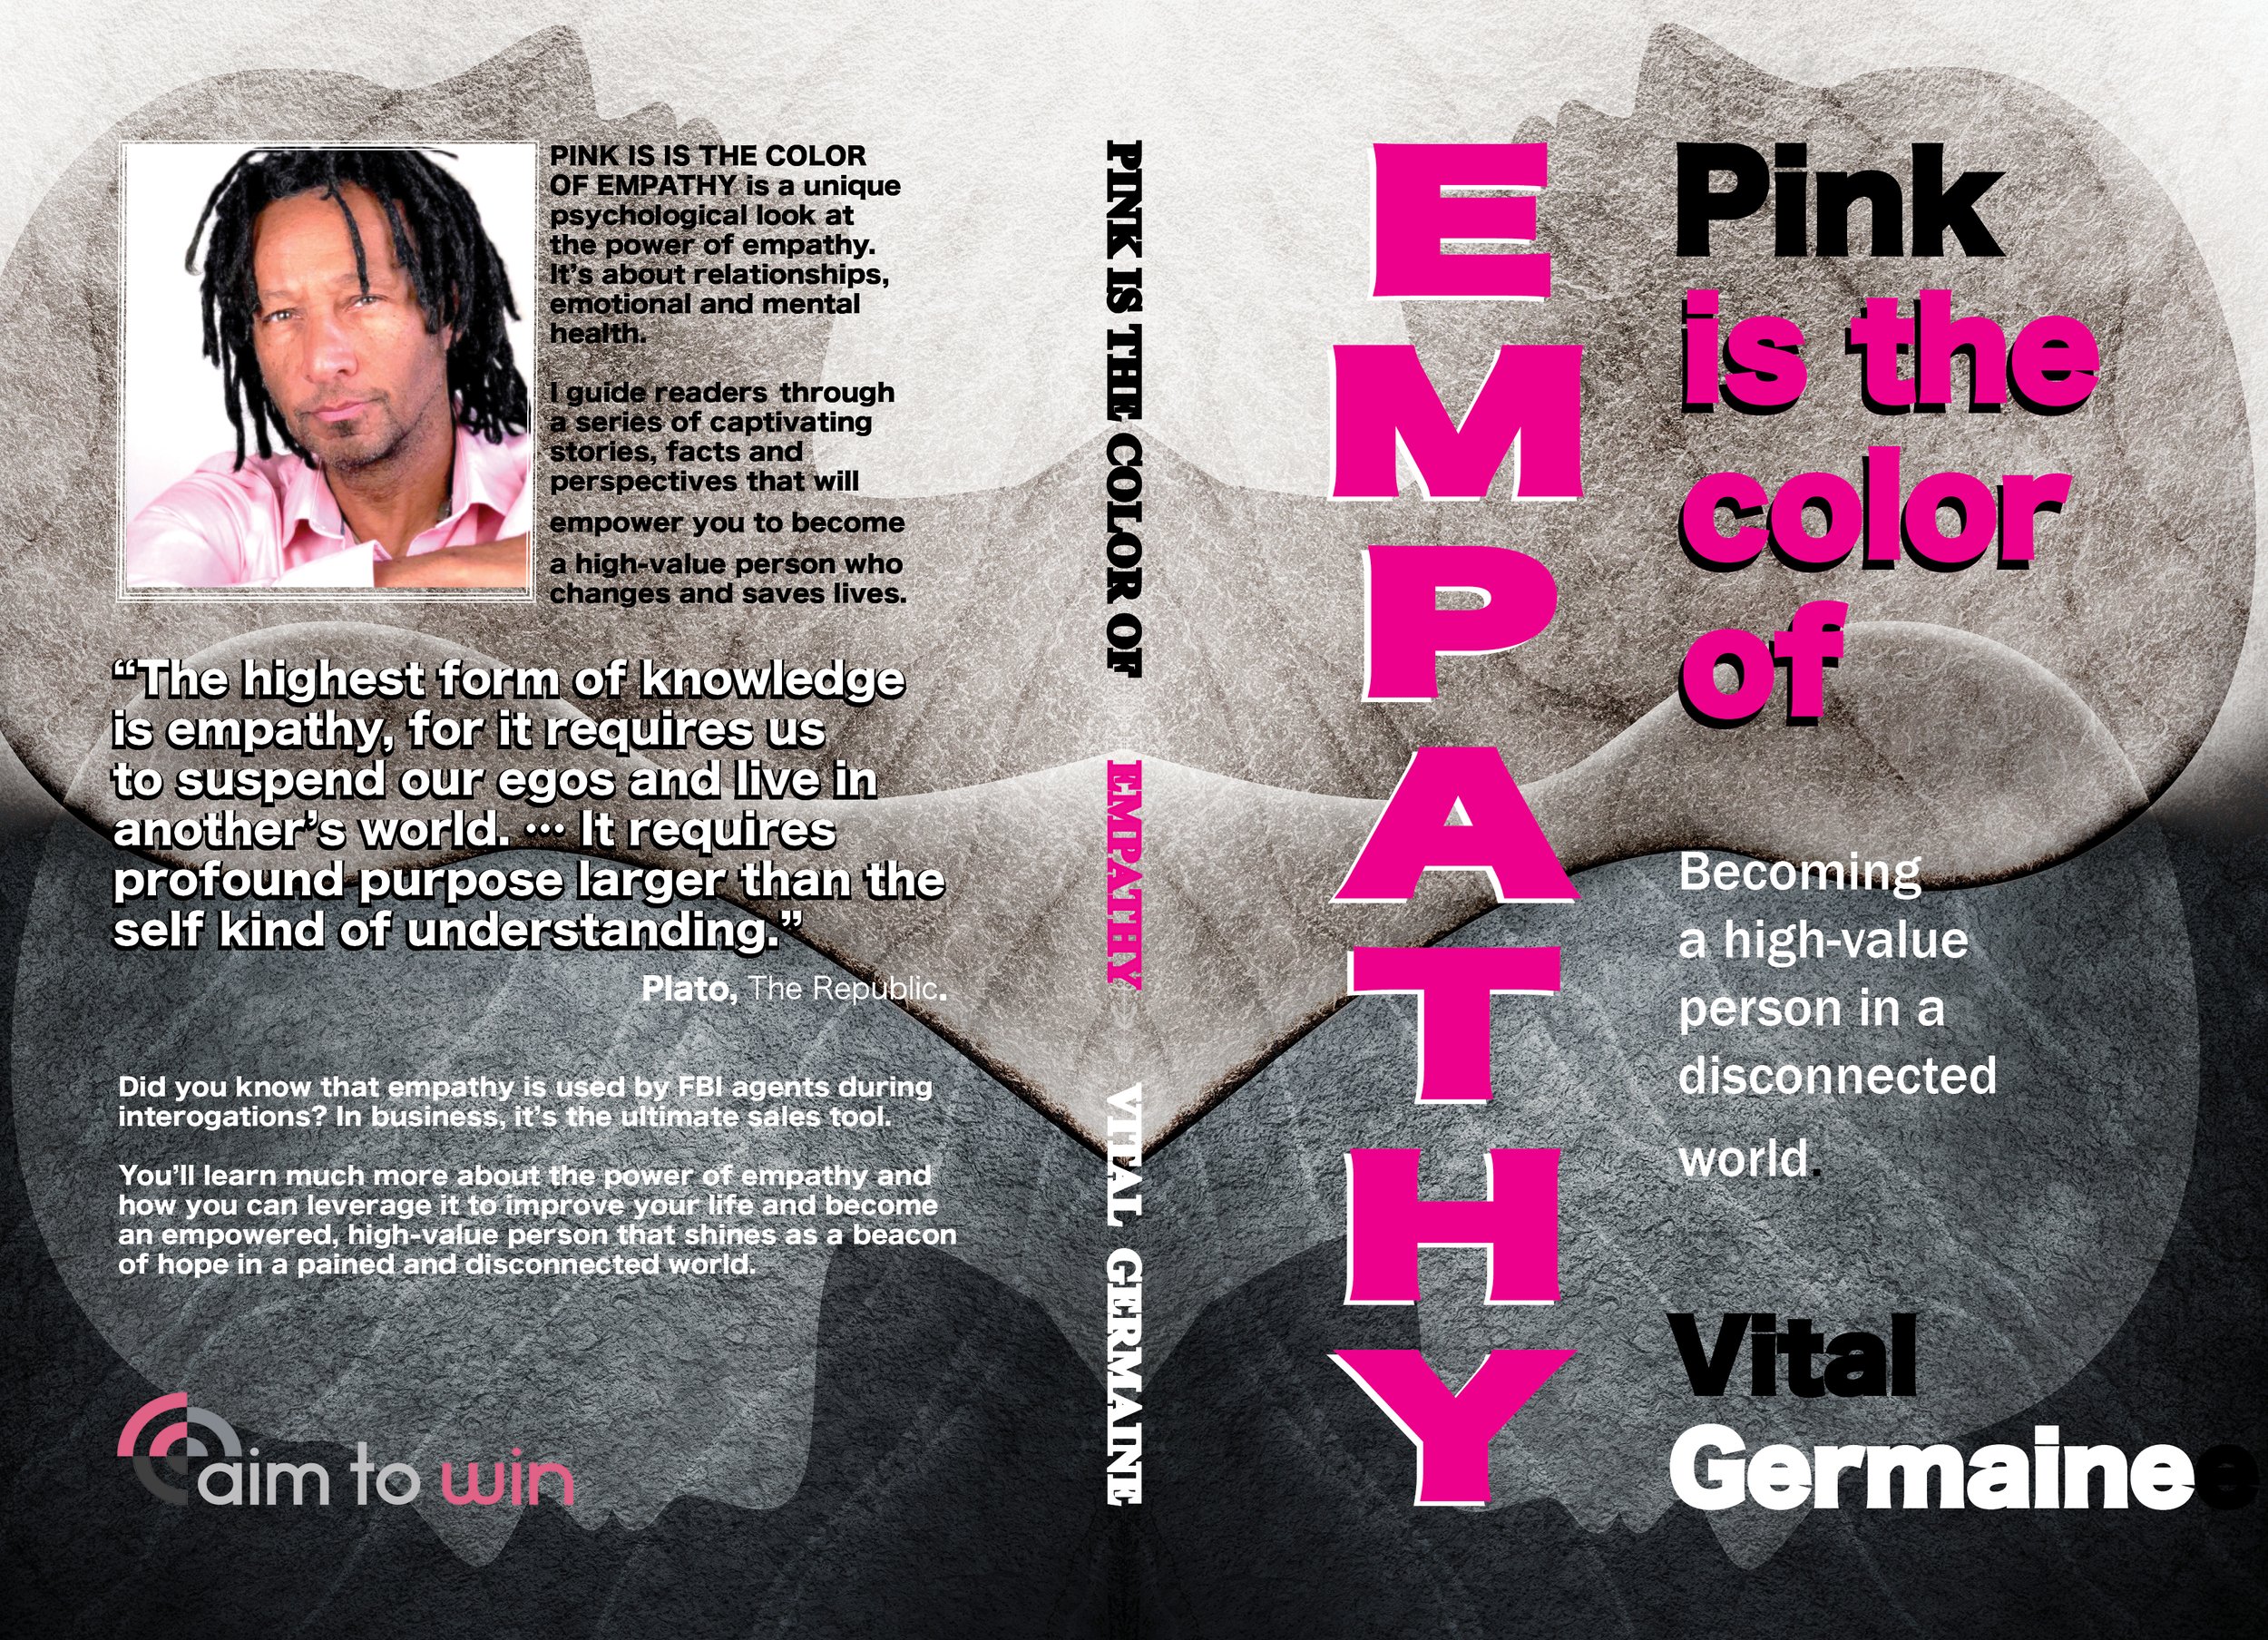 3b 2023. revised PINK IS THE COLOR OF EMPATHY_BOOK COVER 2022 _the color of emotional intelligence.jpg